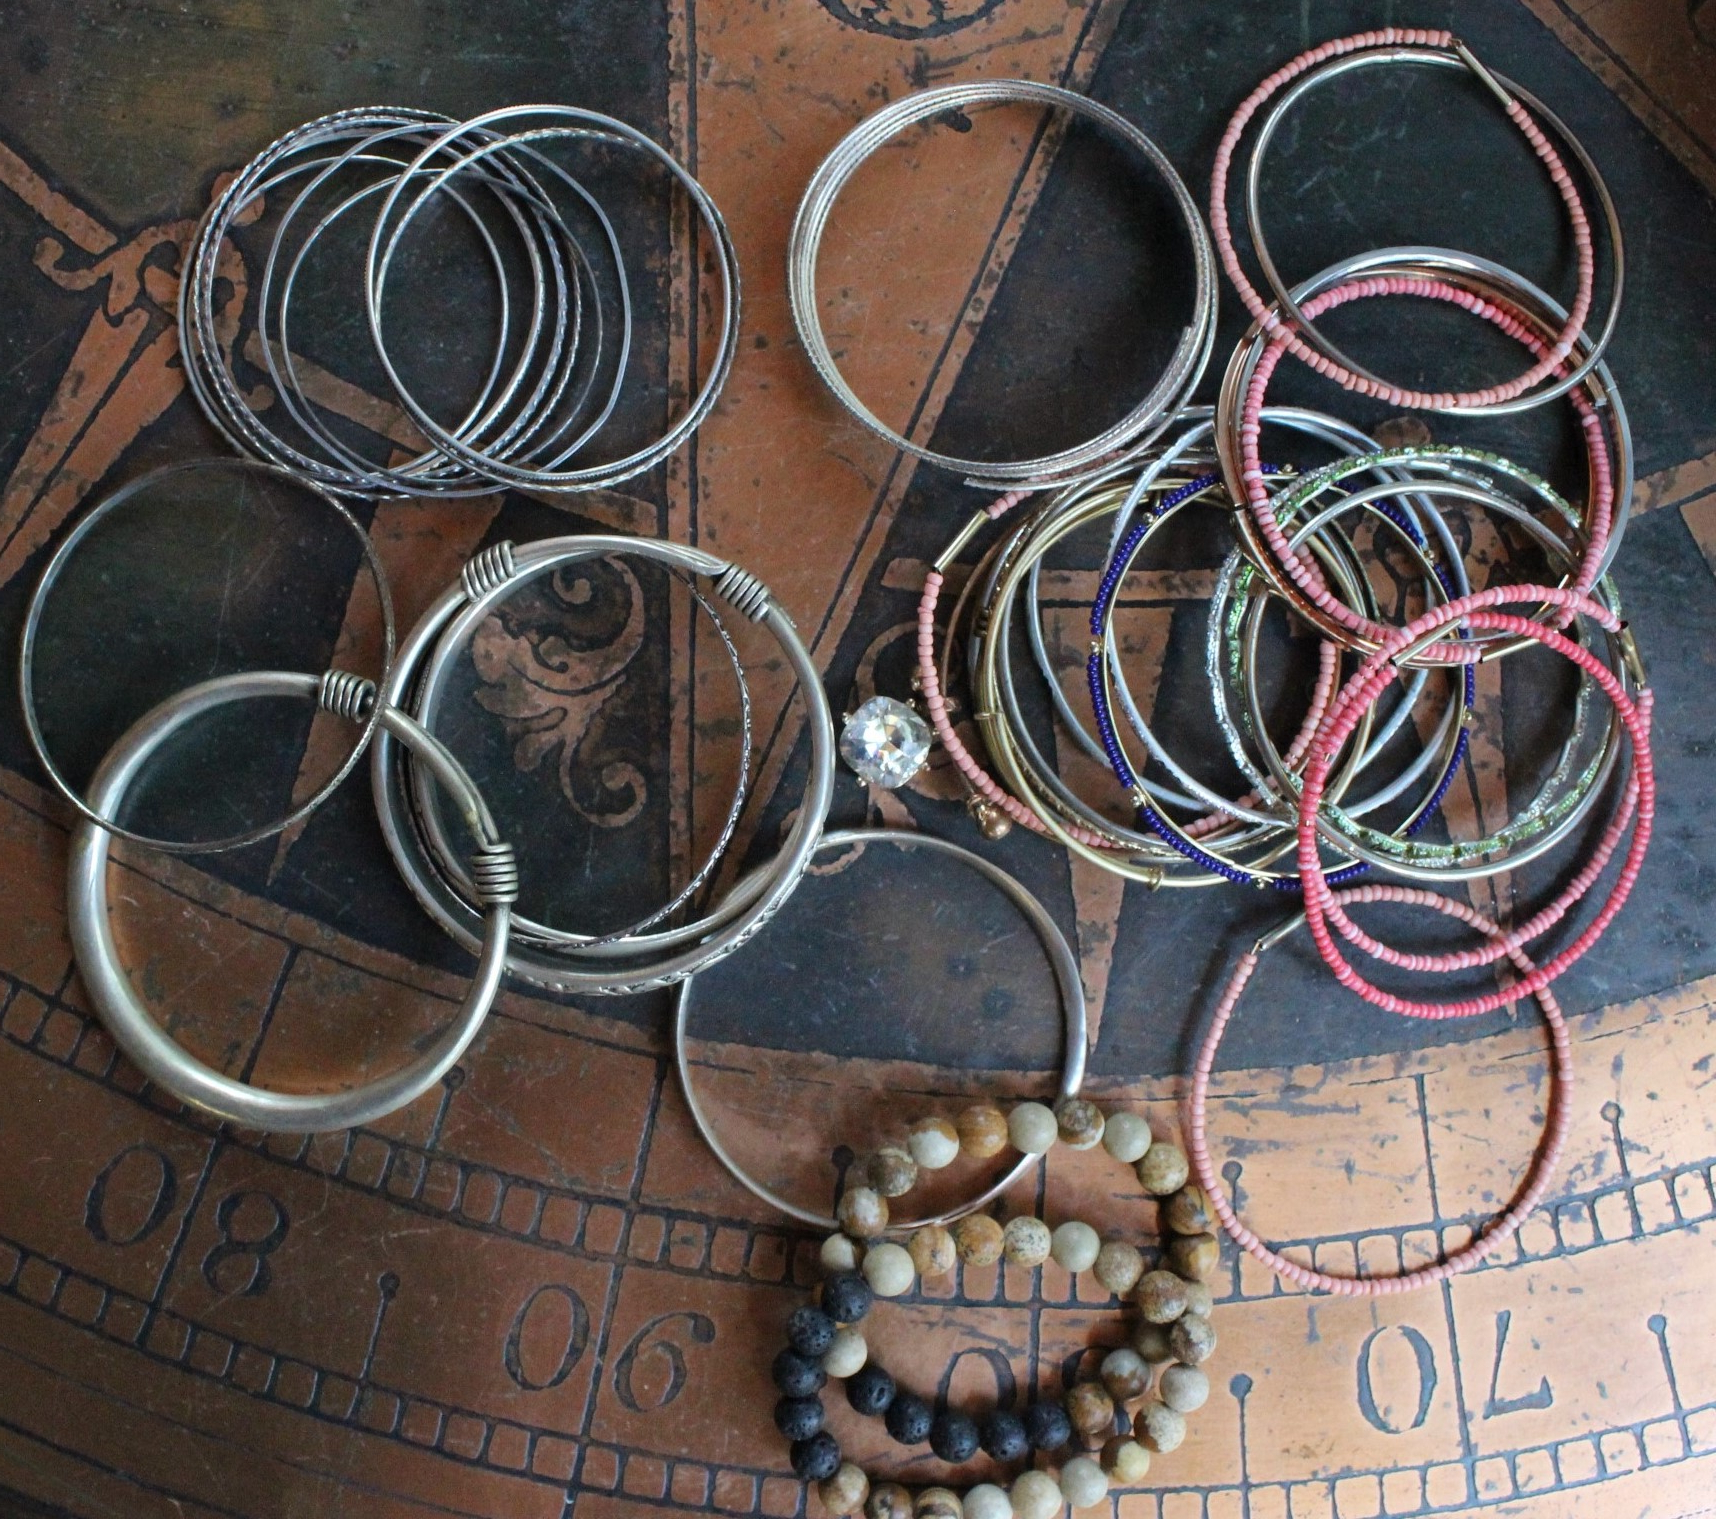 Jewelry Destash - Incredible Collection of Findings, Antique Sterling Bangles, Vintage Watch & More!